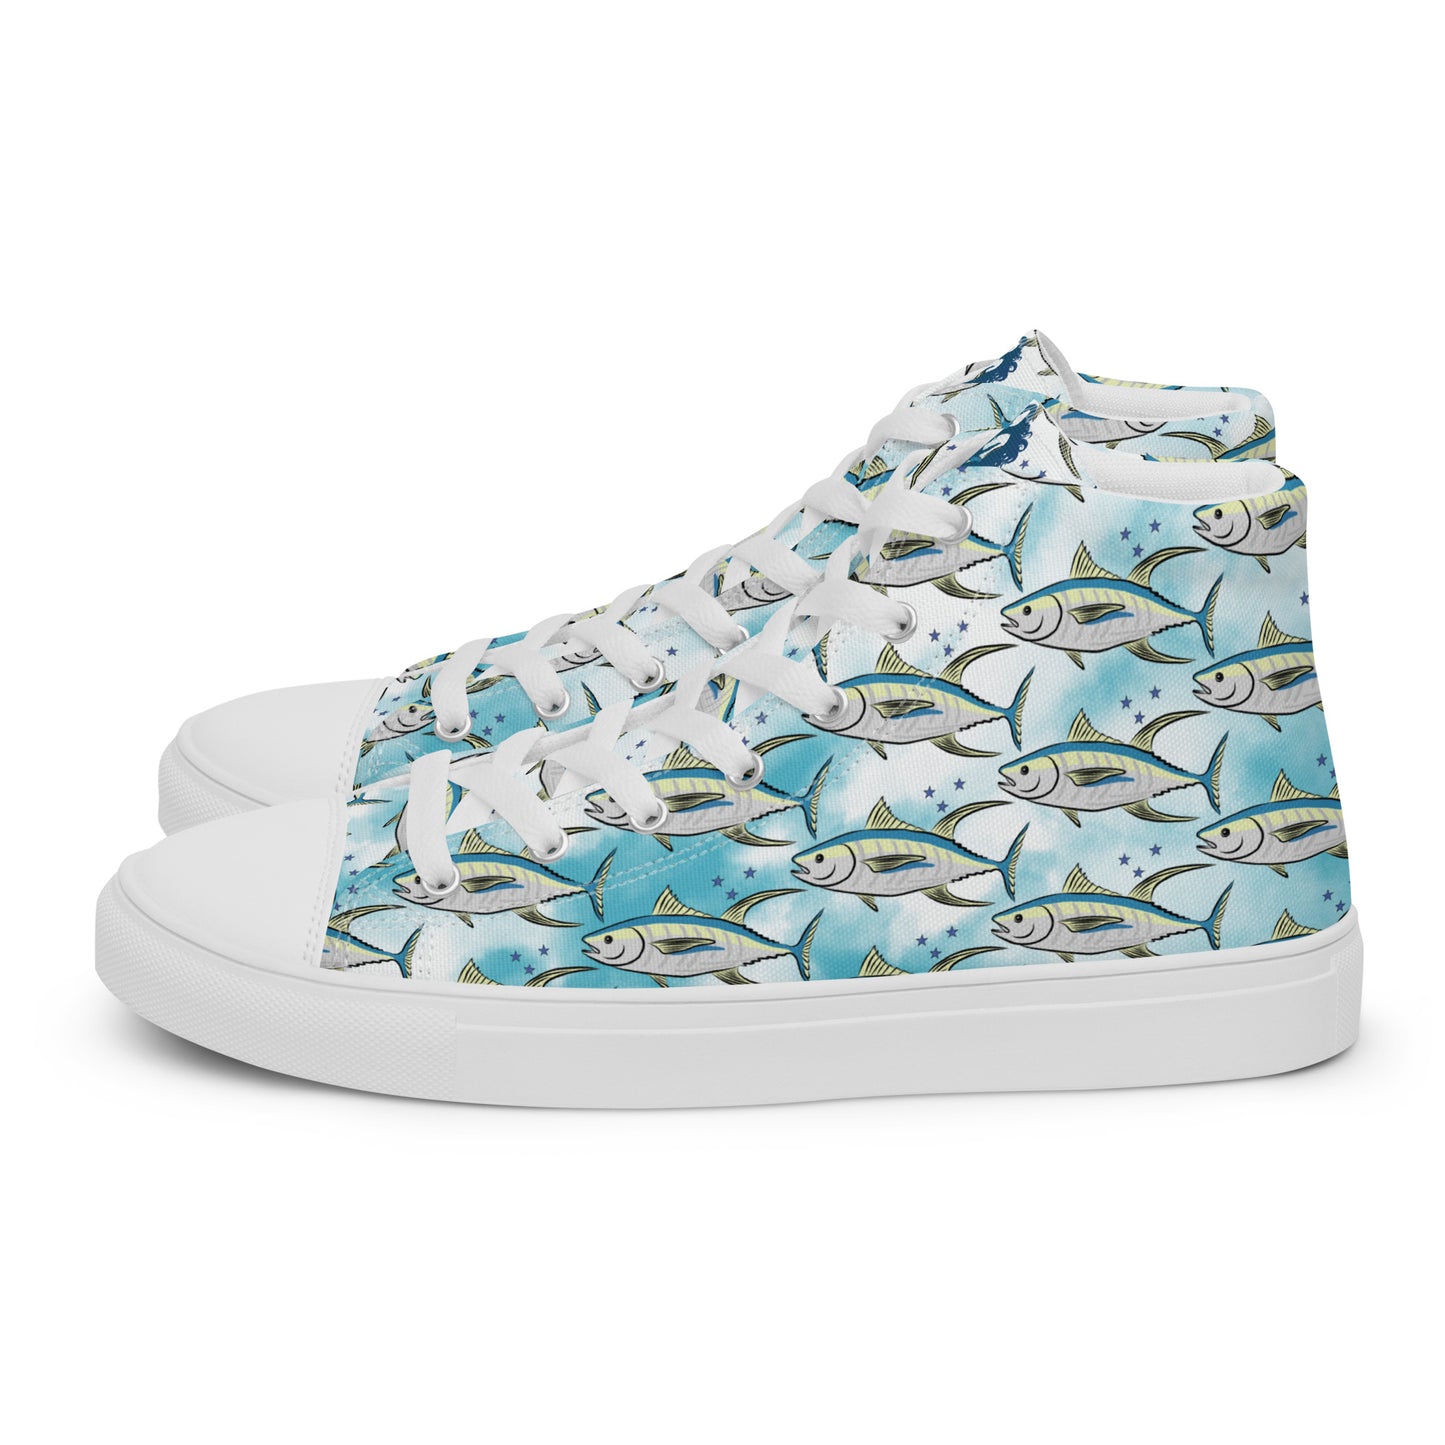 Local Catch Women’s high top canvas shoes